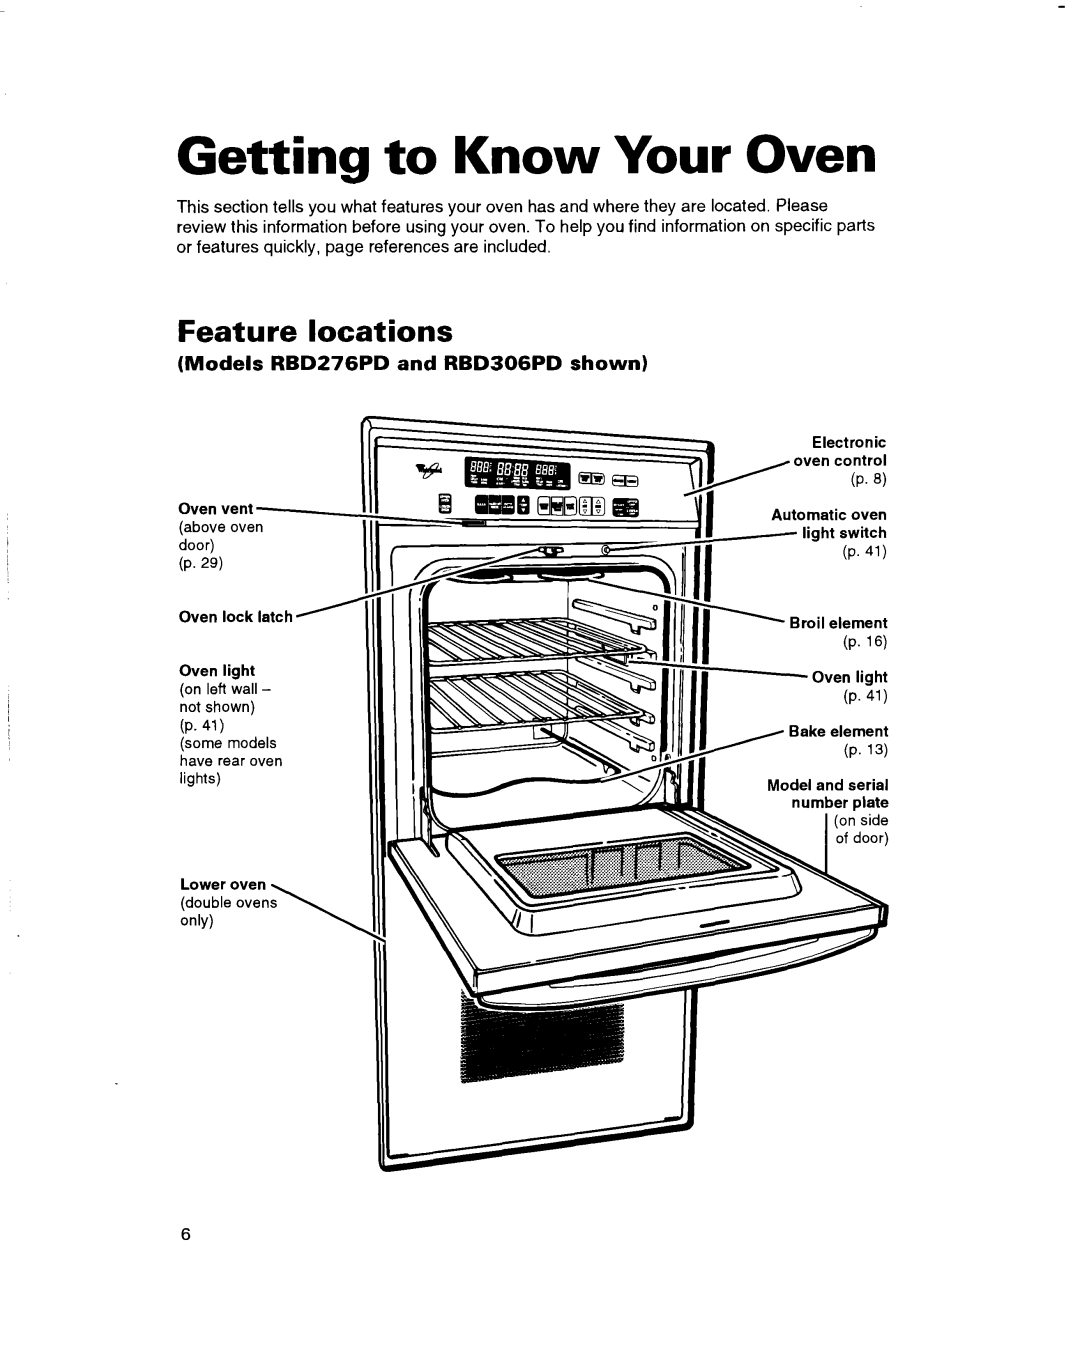 Whirlpool RBD306PD, RBS245PD, RBS305PD, RBS270PD, RBS275PD, RBD275PD, RBD245PD Getting to Know Your Oven, Feature locations 